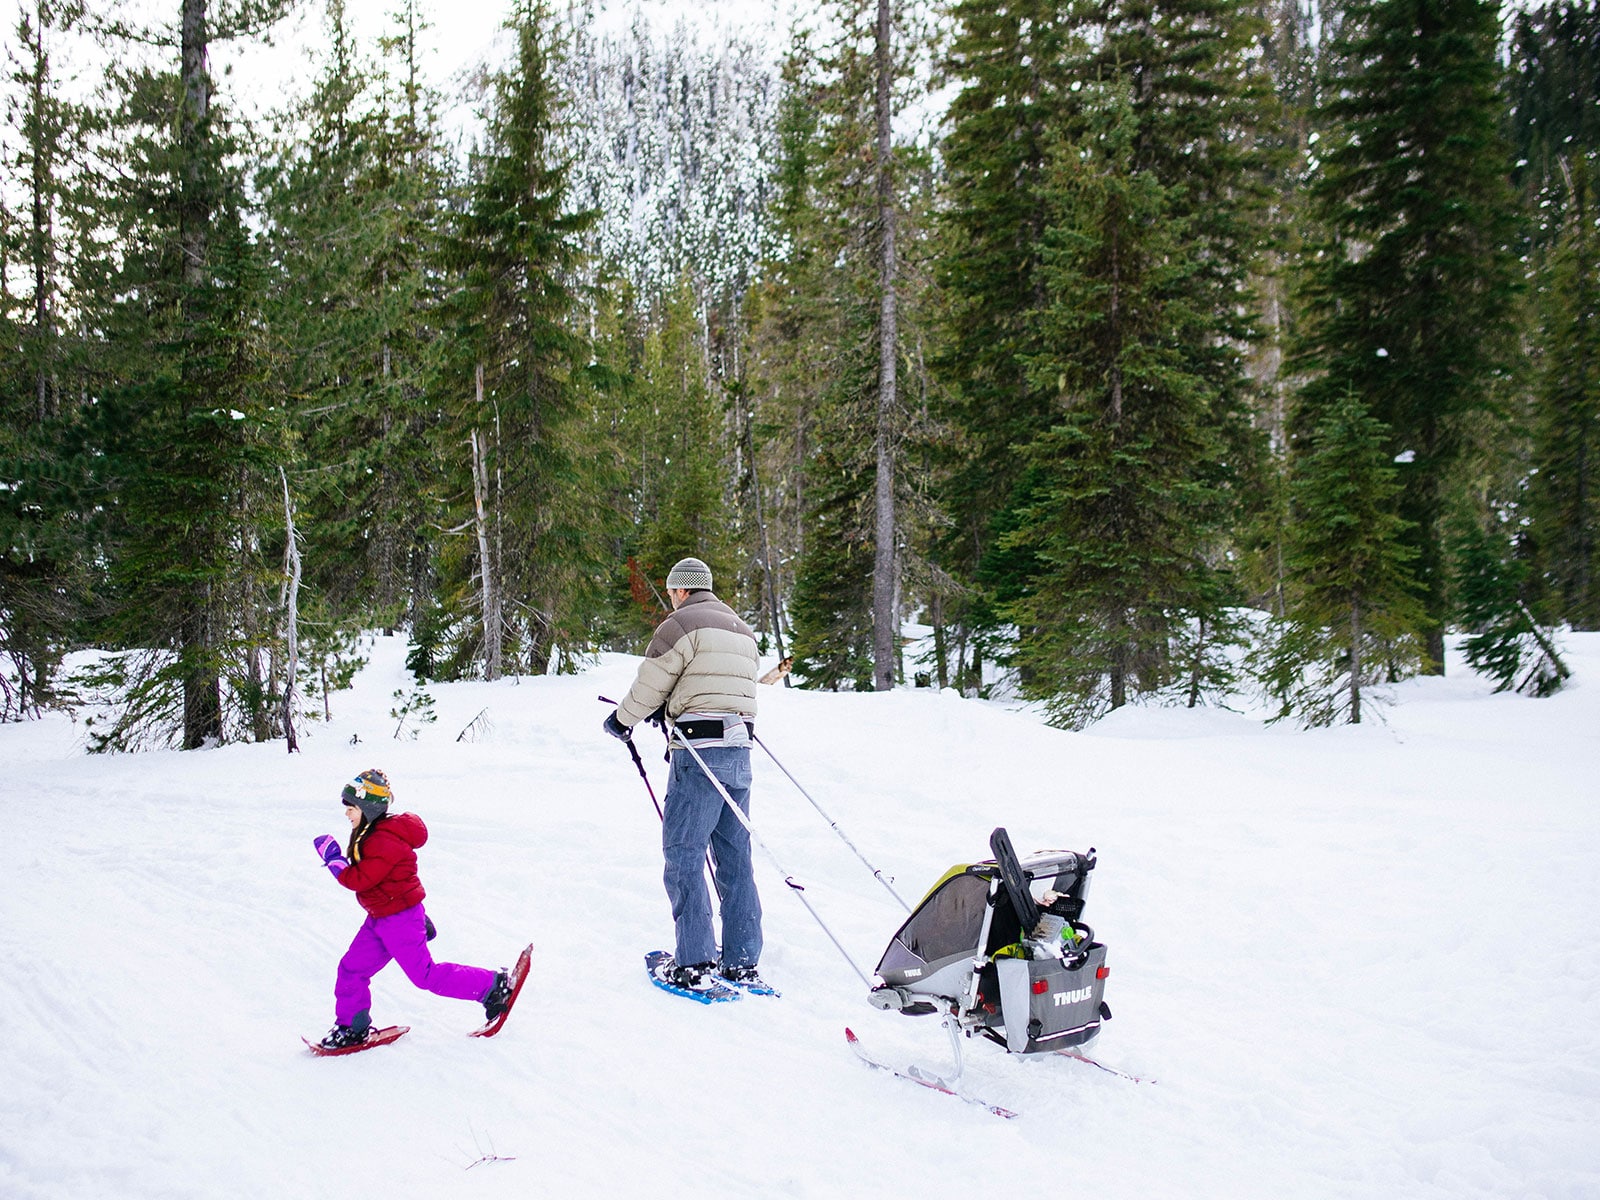 Family on a snowy Christmas tree hunt with daughter running in snowshoes and father pulling a baby chariot on skis